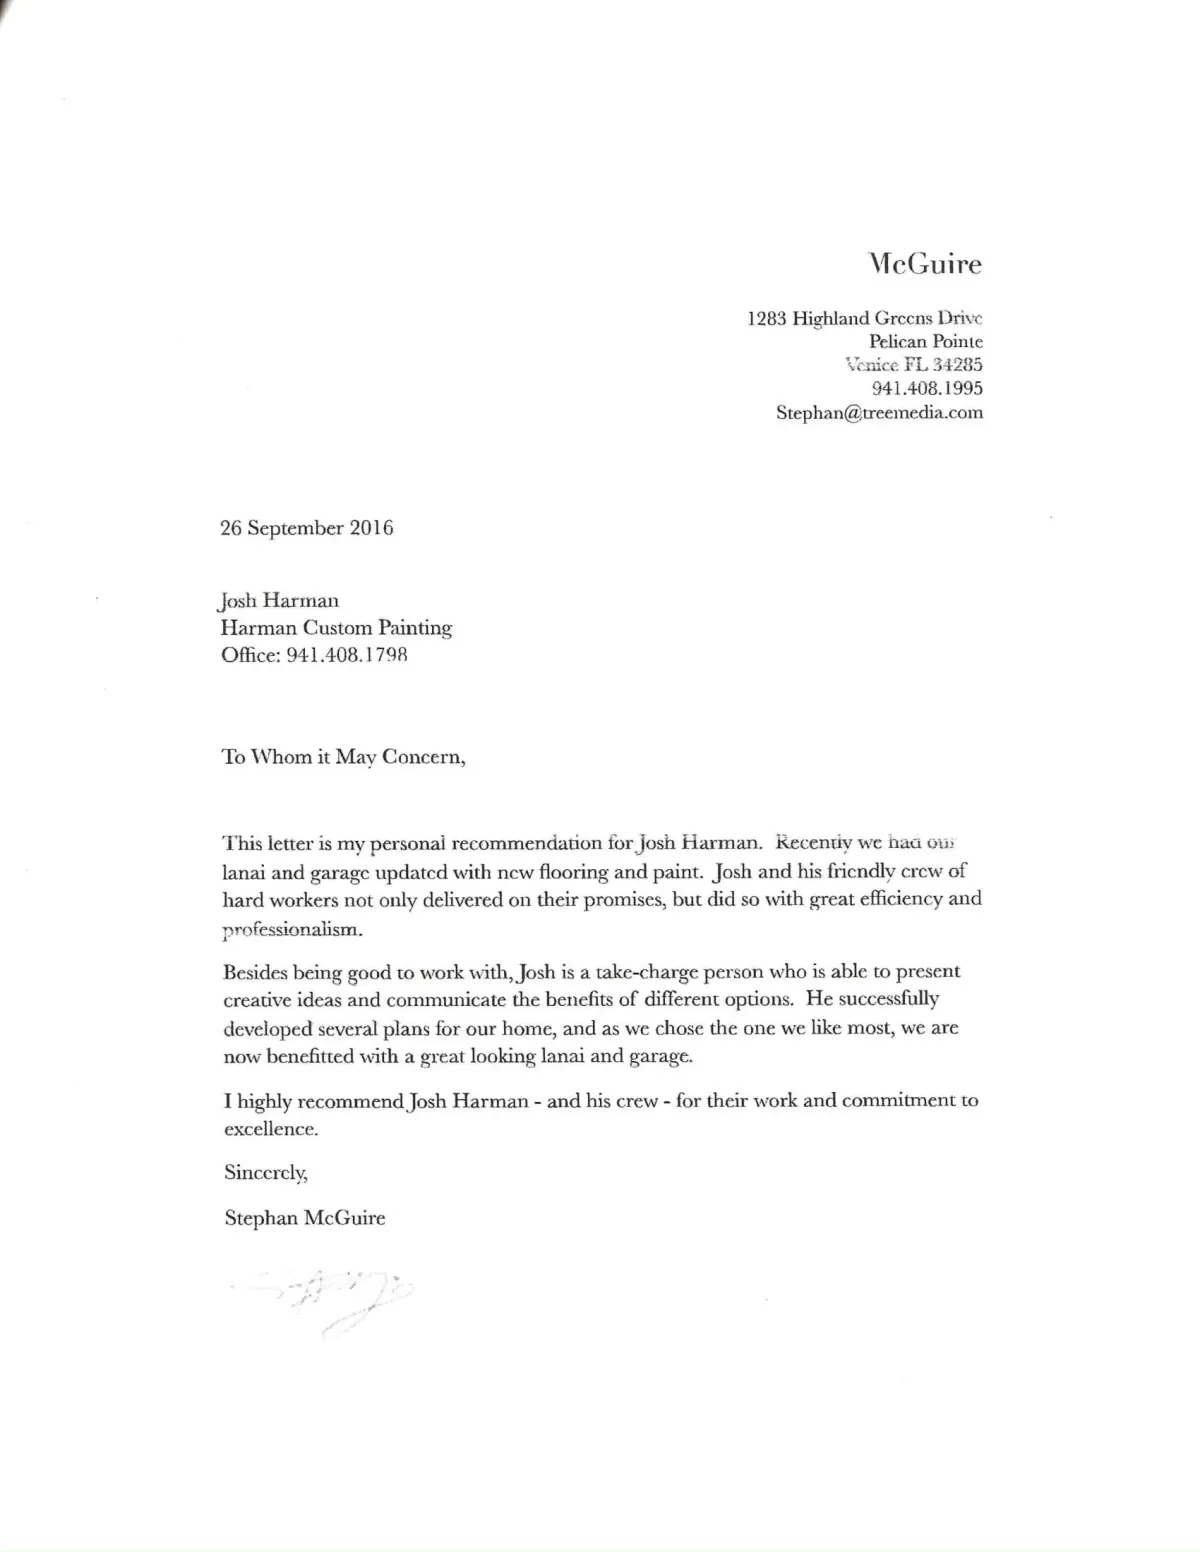 Letter of Recommendation - Stephan Mcguire